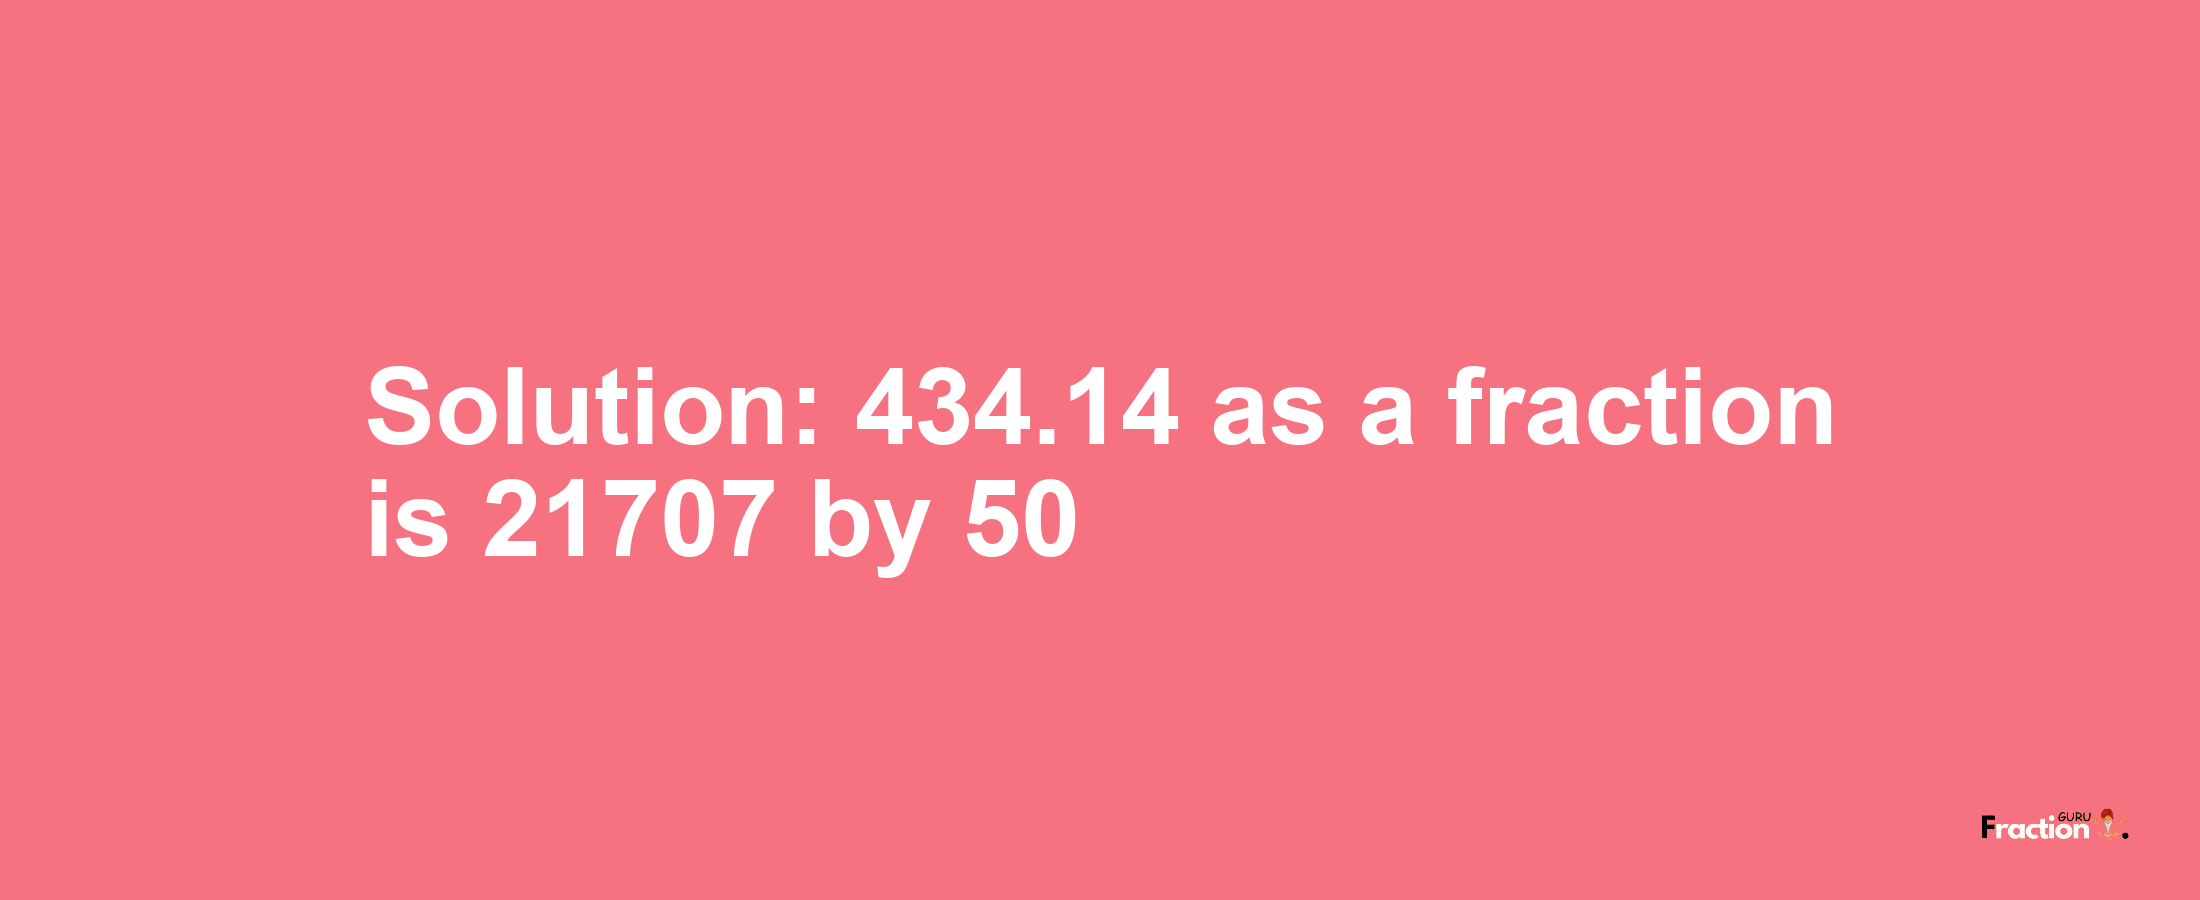 Solution:434.14 as a fraction is 21707/50